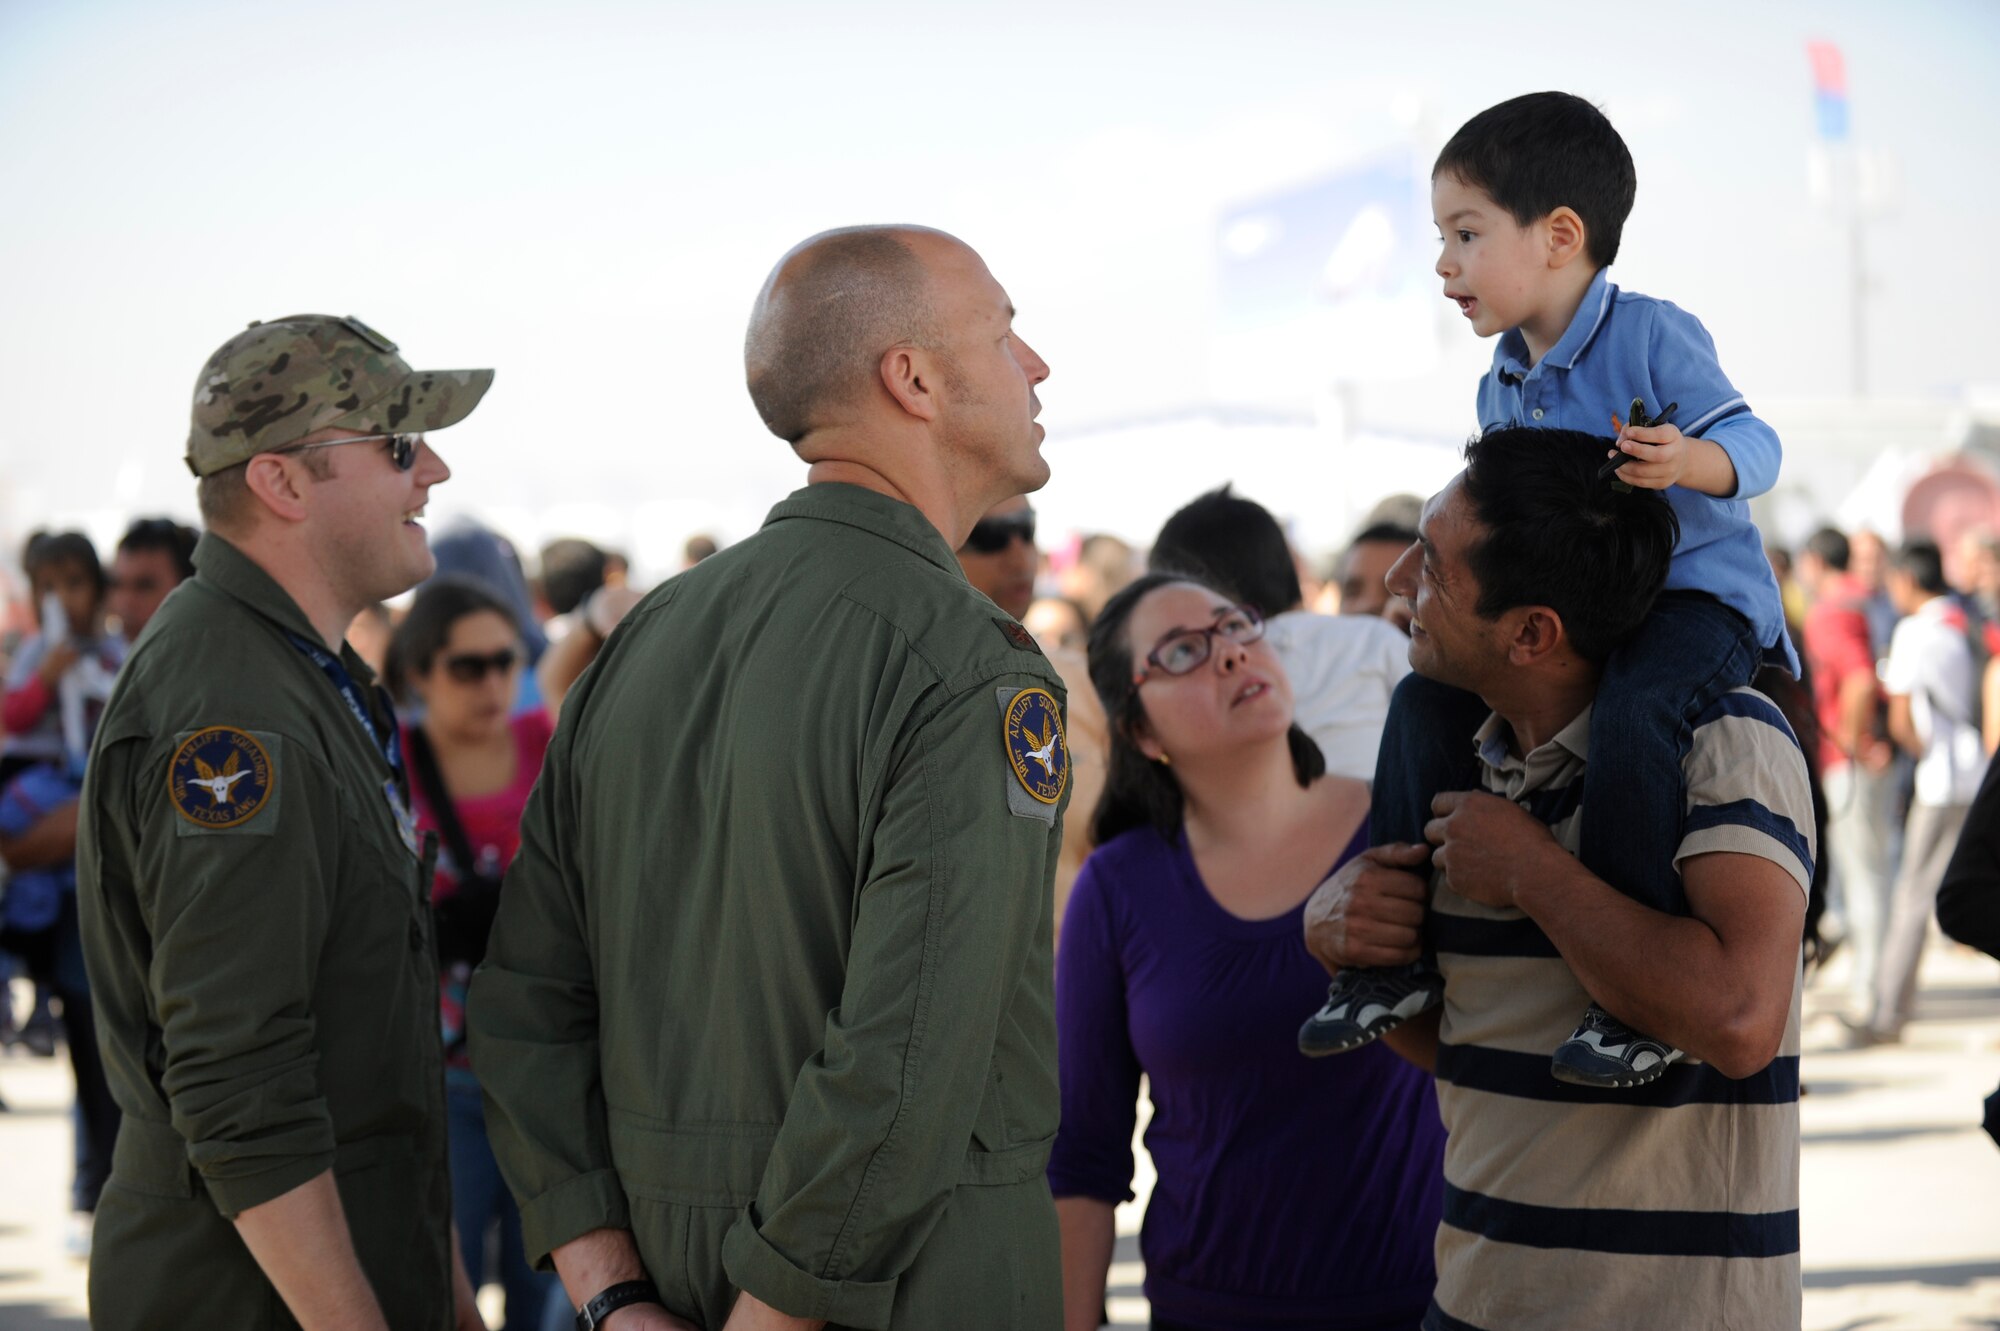 Tech. Sgt. Brian Krause and Maj Josh Ritzmann, members of the 136th Airlift Wing, attempt to communicate with a young local visitor enjoying FIDAE (Feria Internacional del Aire y del Espacio), an international trade exhibition air and space show, in Santiago, Chile, March 29, 2014. Krause and Ritzmann were in Chile with other members of the Texas Air National Guard for a subject matter expert exchange through the National Guard Bureau's State Partnership Program. (U.S. Air National Guard photo by Senior Master Sgt. Miguel Arellano / Released)